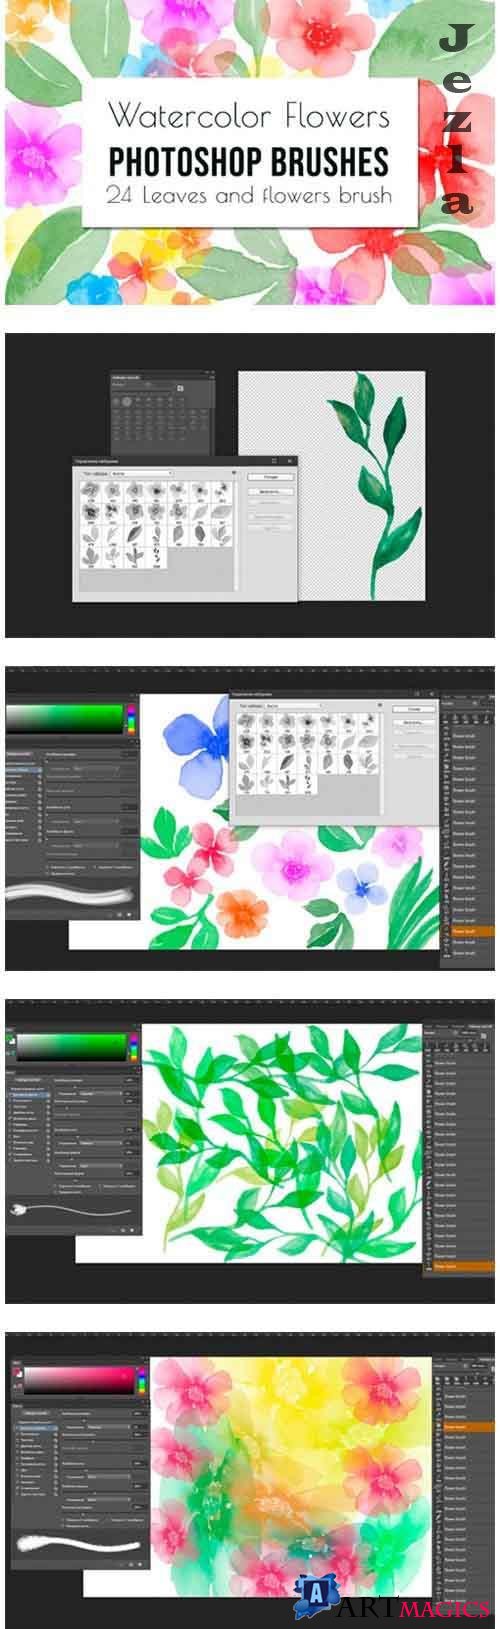 Flowers and leaves Photoshop Brushes - 1202019